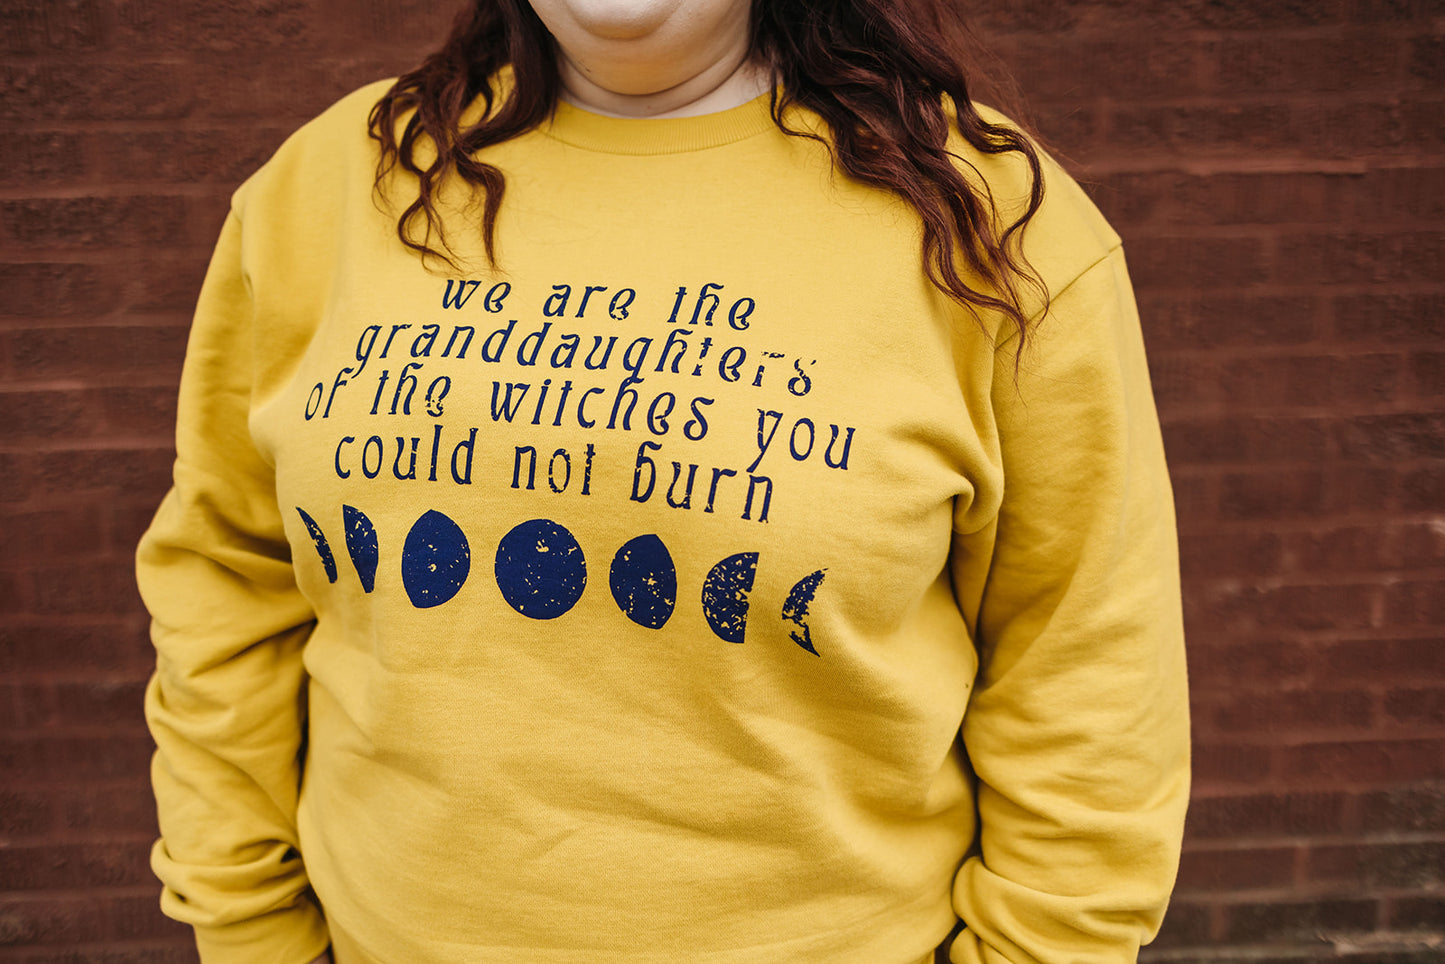 Load image into Gallery viewer, we are the granddaughters crewneck sweatshirt
